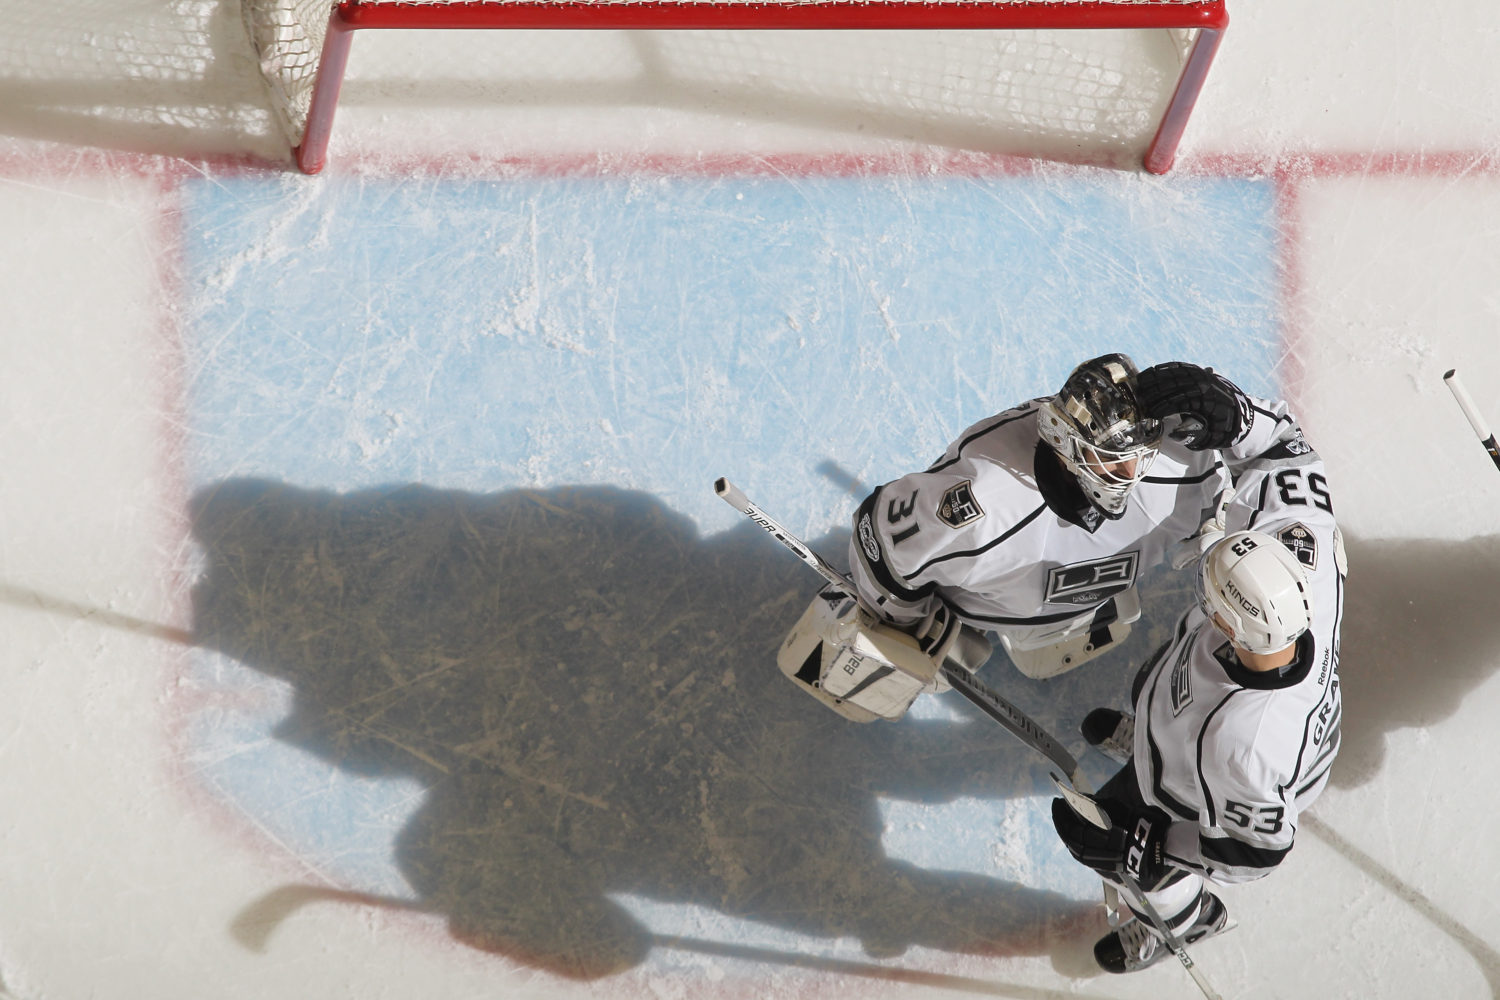 Kings roster and salary chart: 2015 offseason - LA Kings Insider